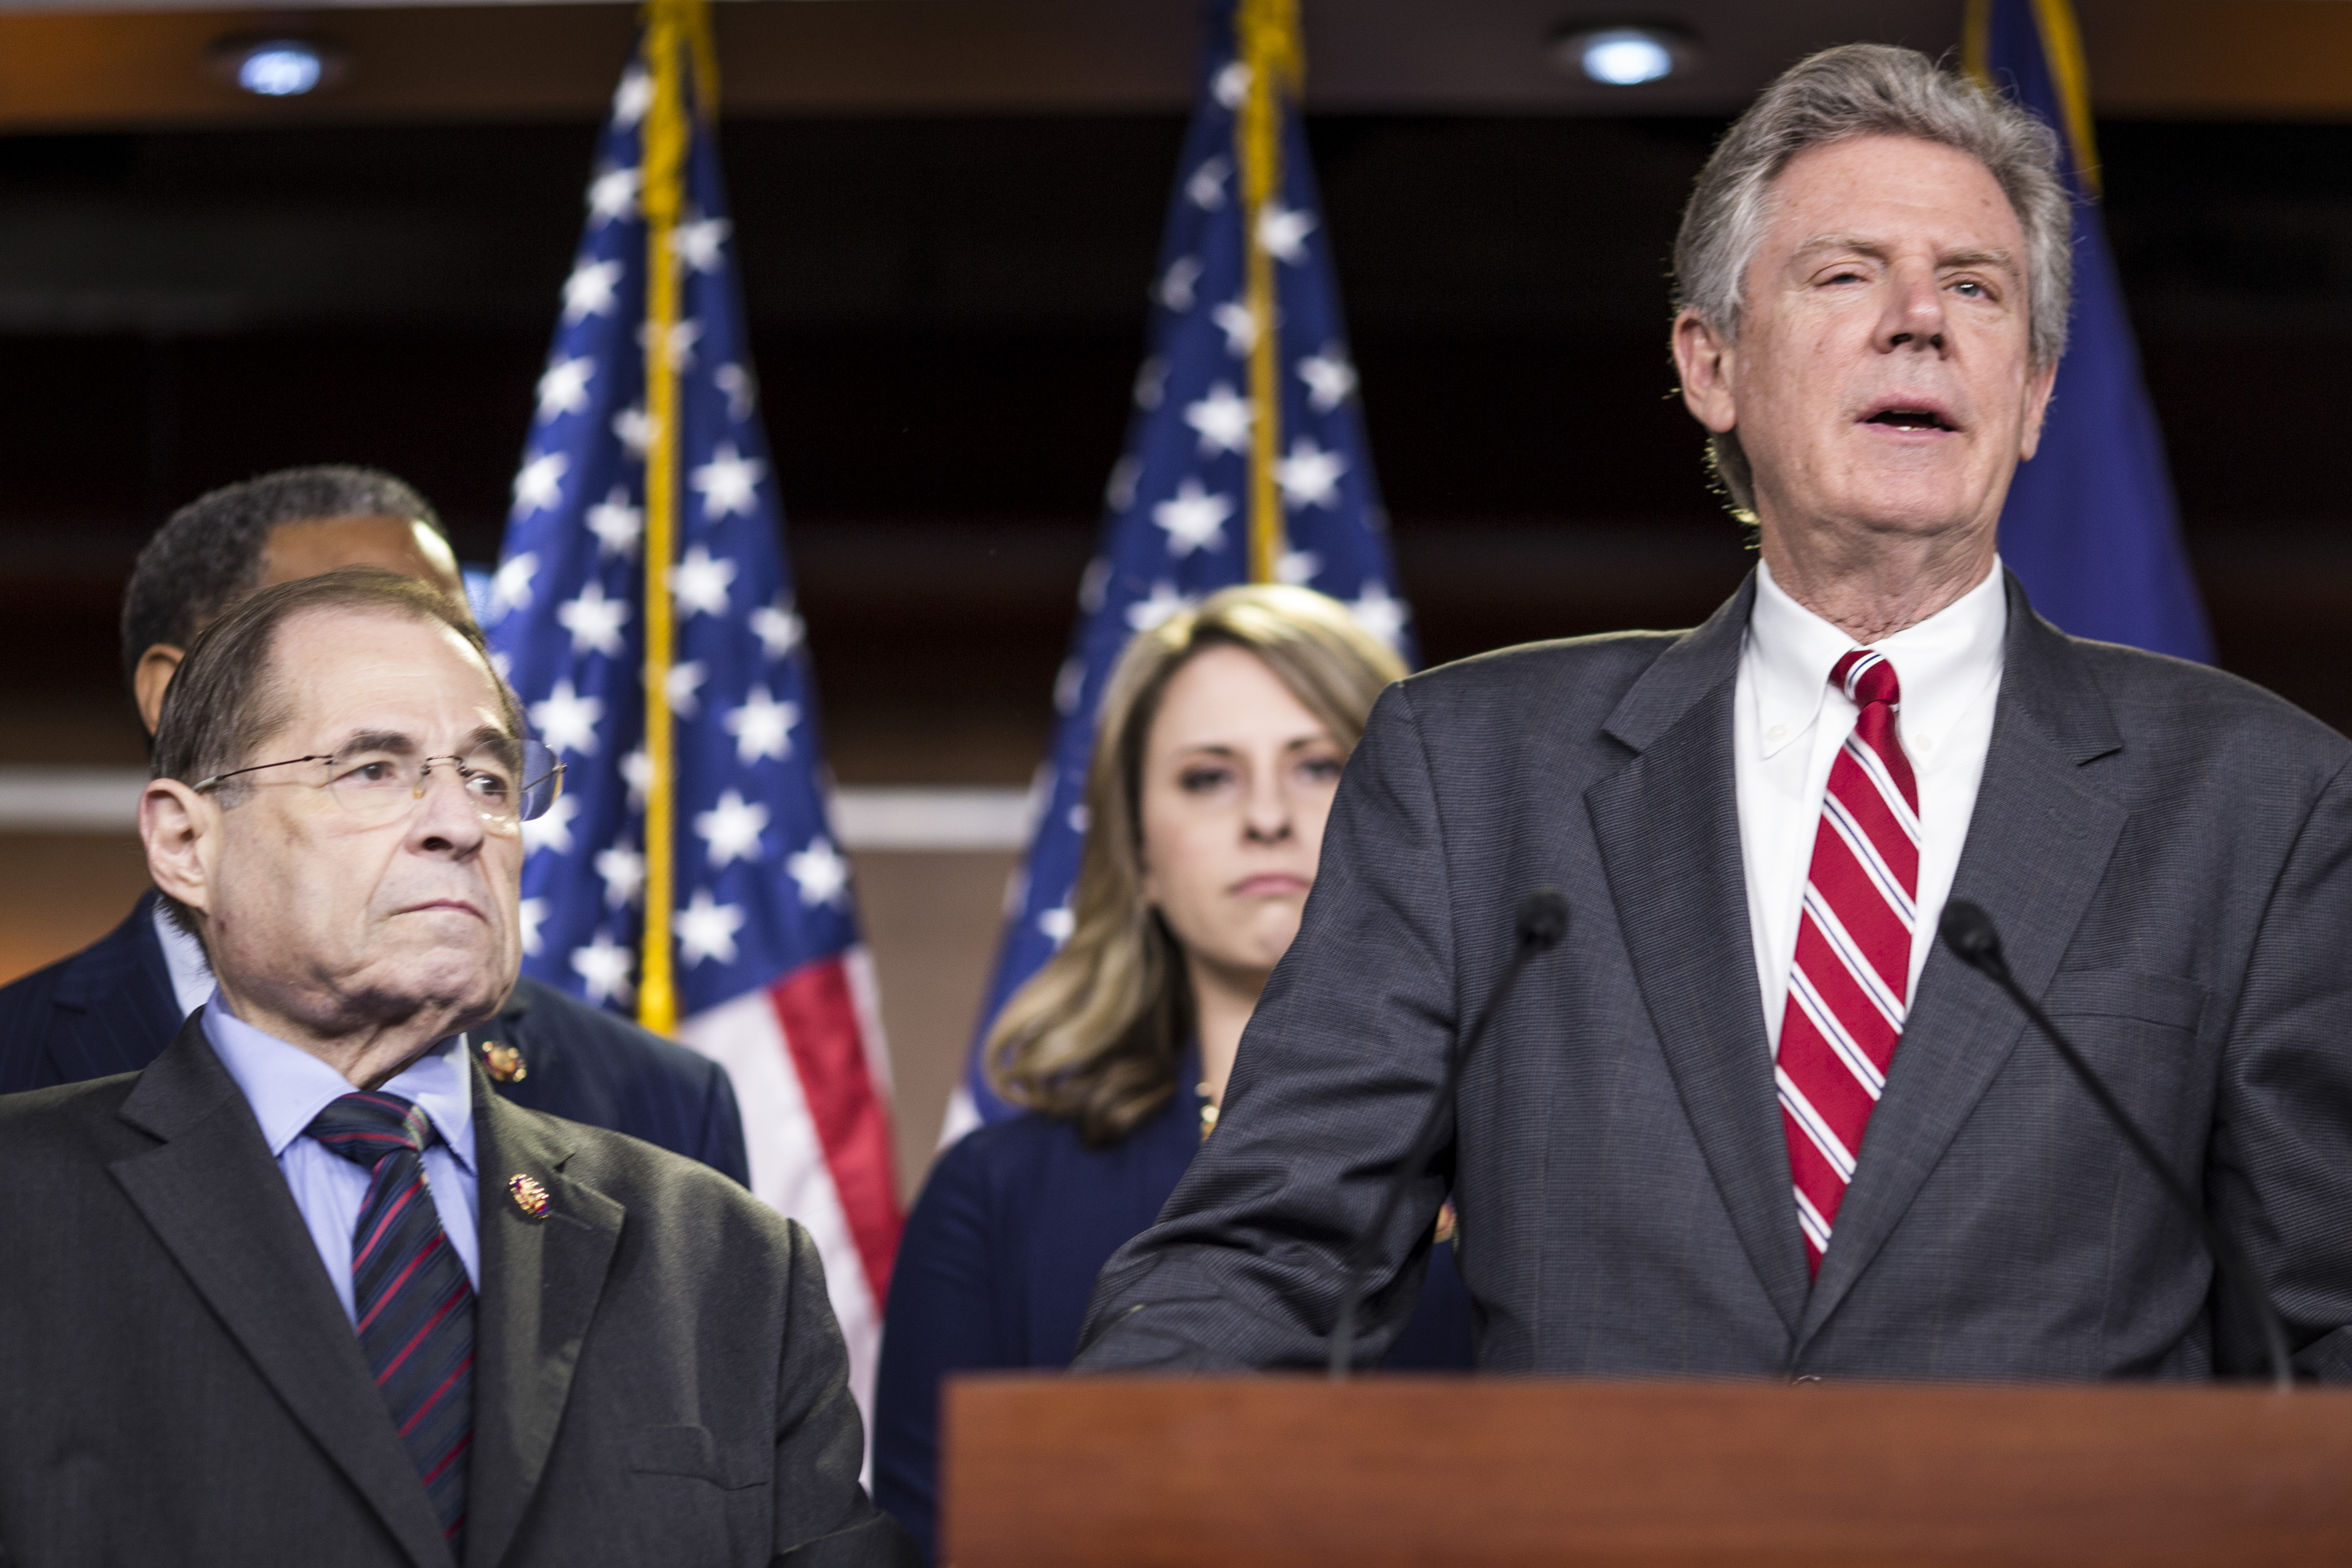 WASHINGTON, DC - APRIL 09: House Energy and Commerce Committee Chairman Rep. Frank Pallone (D-NJ) speaks during a news conference on April 9, 2019 in Washington, DC. House Democrats unveiled new letters to the Attorney General, HHS Secretary, and the White House demanding the production of documents related to Americans health care in the Texas v. United States lawsuit. Also pictured is House Judiciary Committee Chairman Rep. Jerry Nadler (D-NY). (Photo by Zach Gibson/Getty Images)